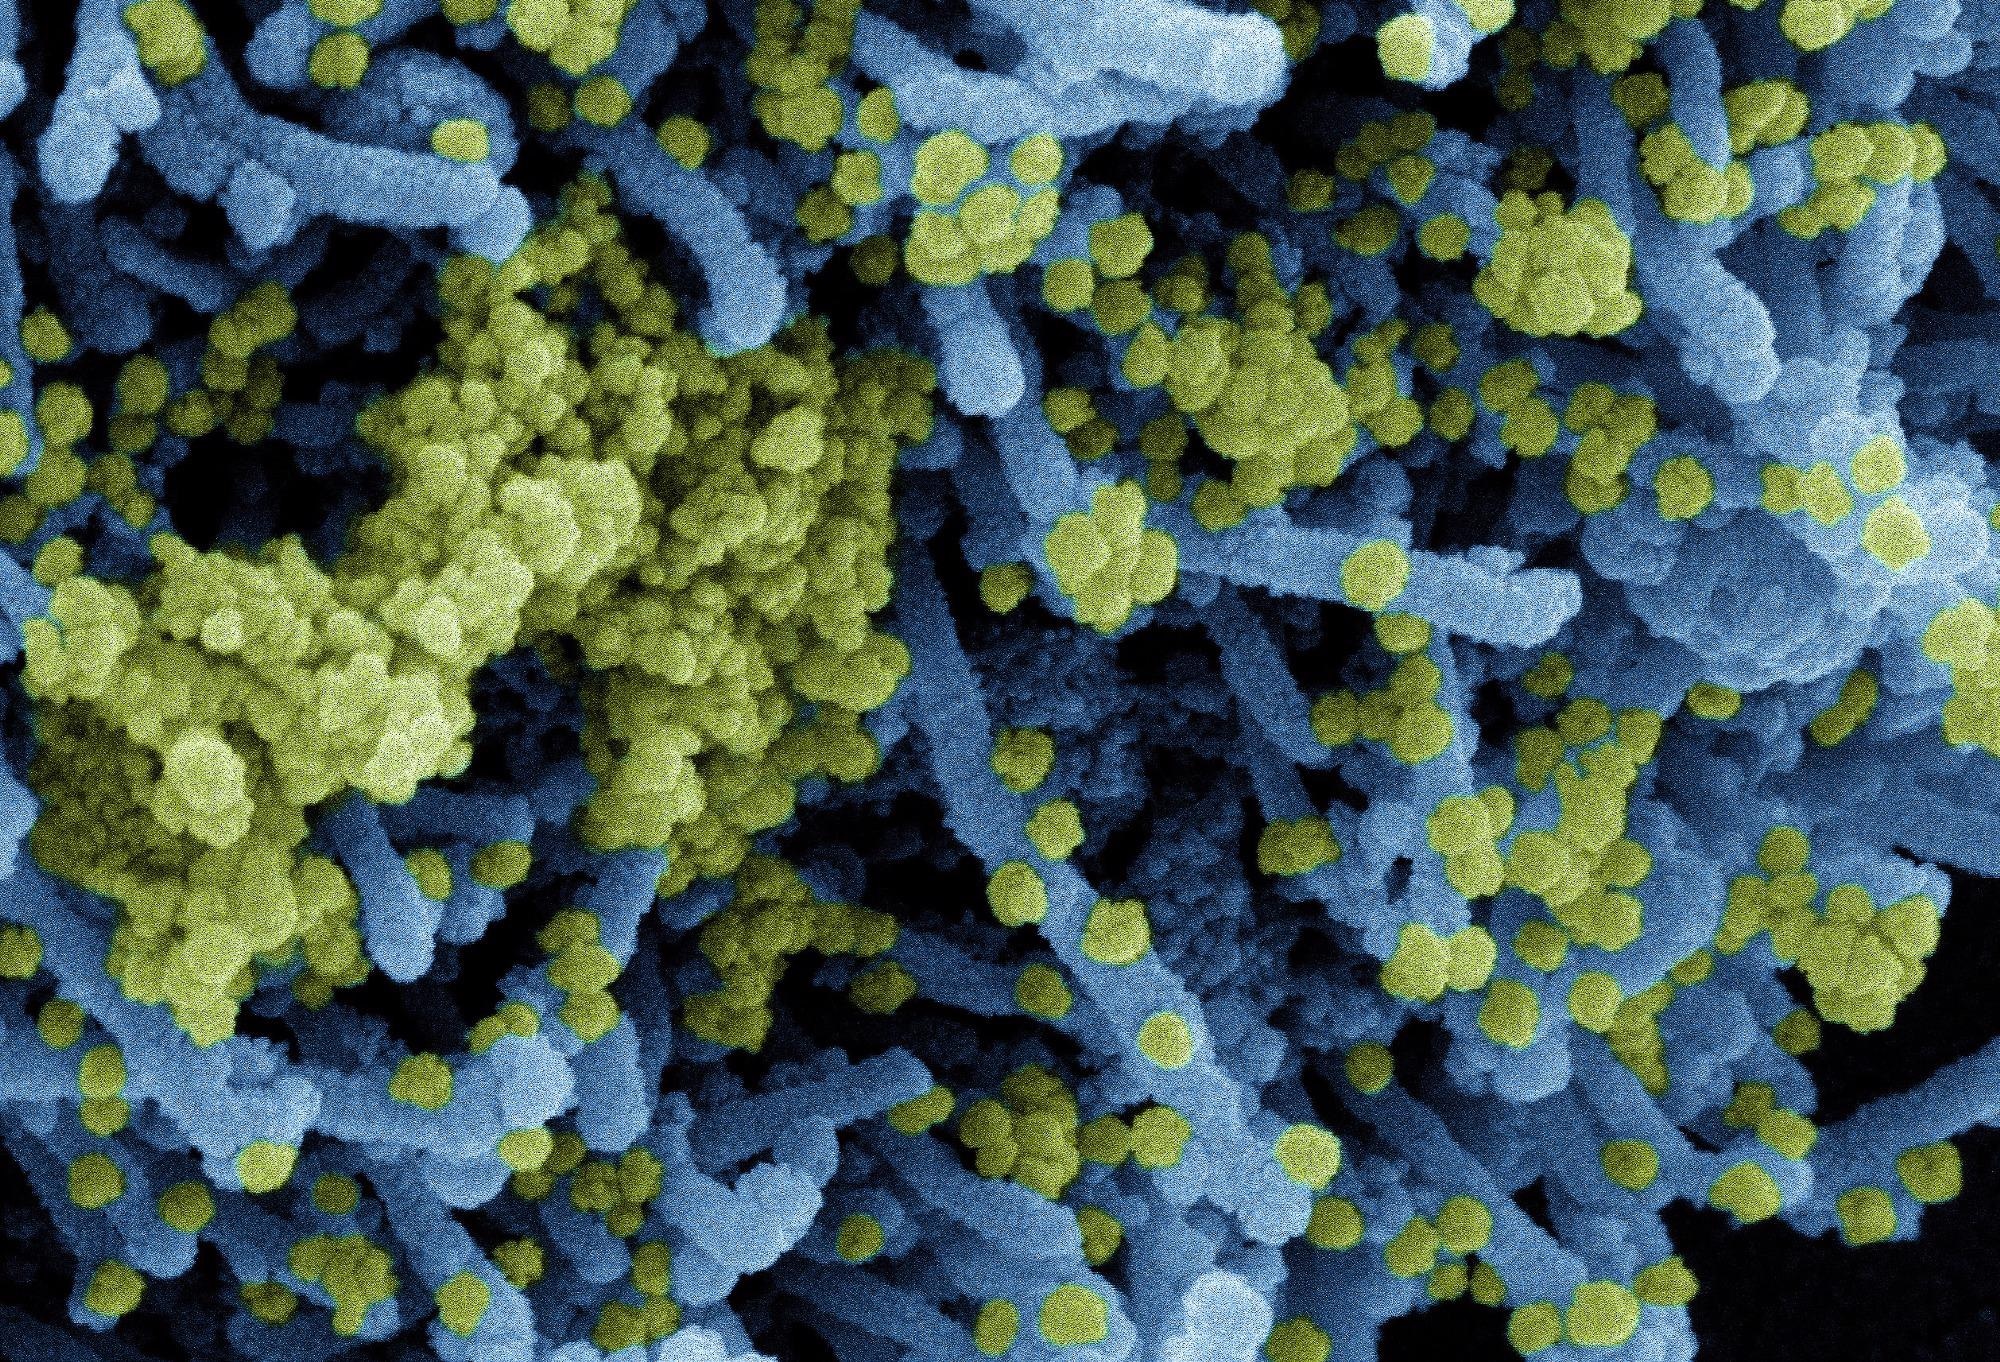 Study: SARS-CoV-2 vaccination can elicit a CD8 T-cell dominant hepatitis. Image Credit: NIAID